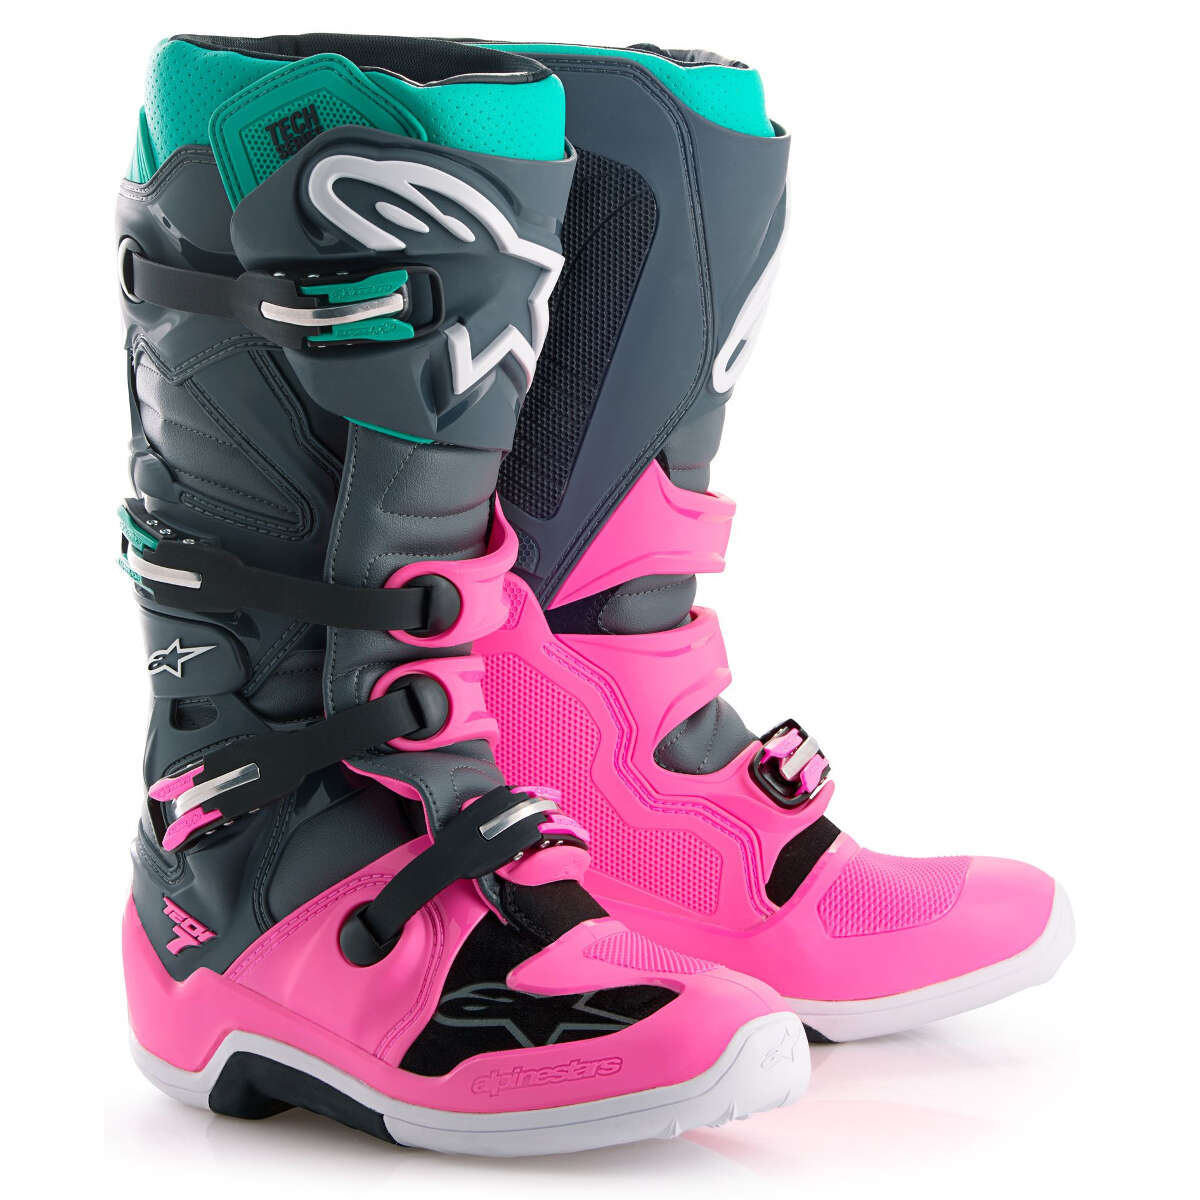 Alpinestars MX Boots Tech 7 Limited Edition Indy Vice, Gray/Pink/Turquoise